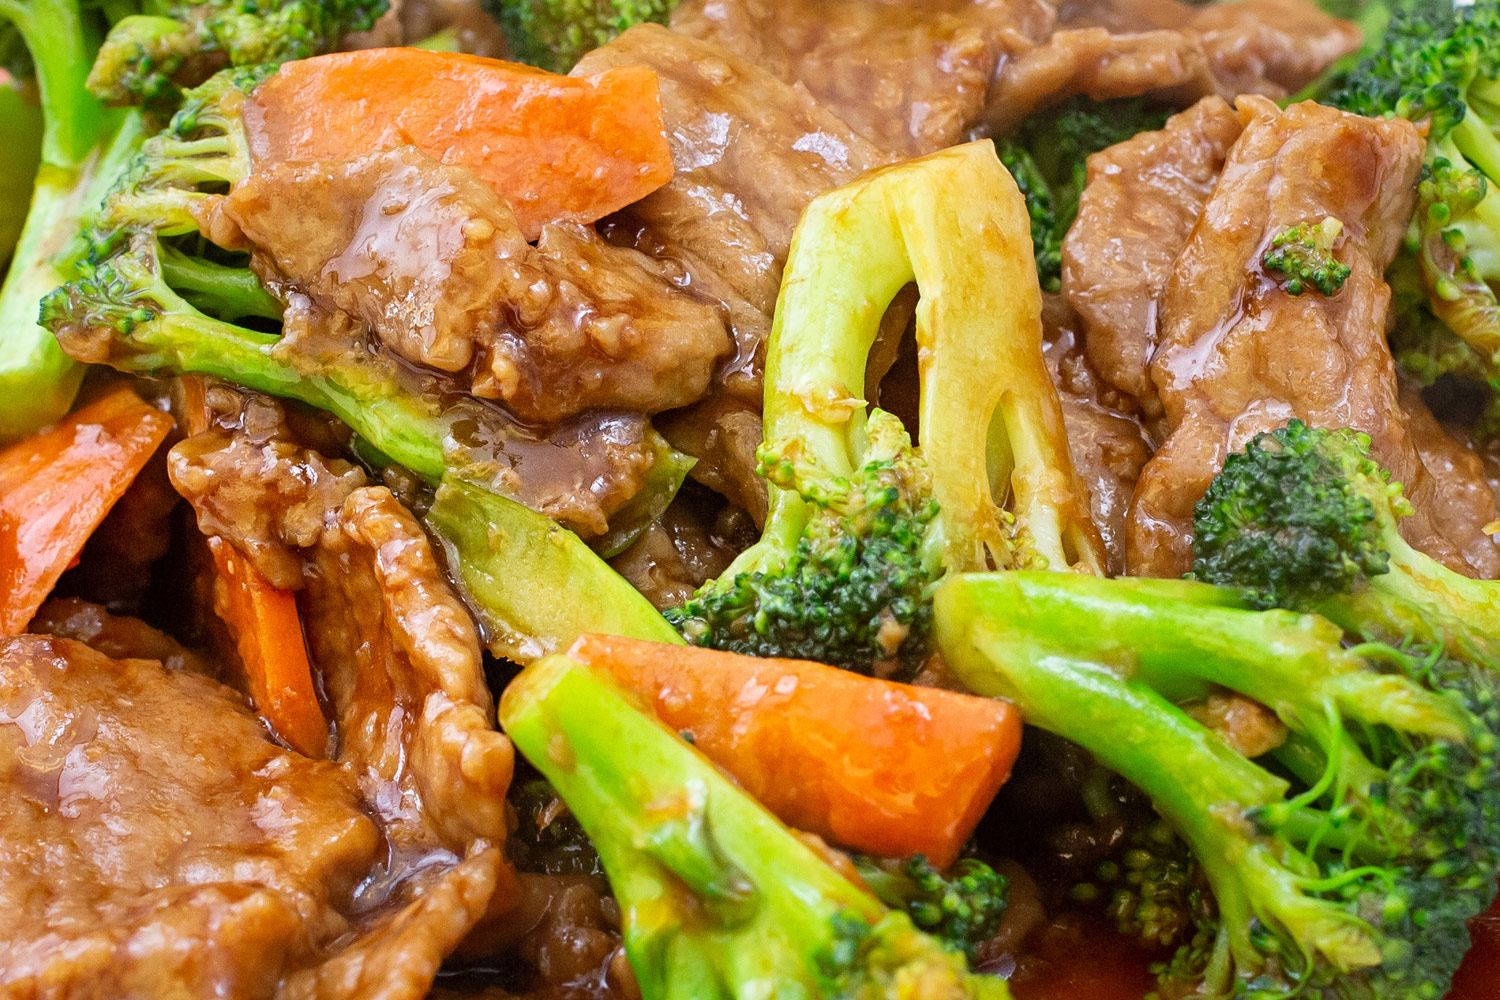 beef and broccoli with carrots